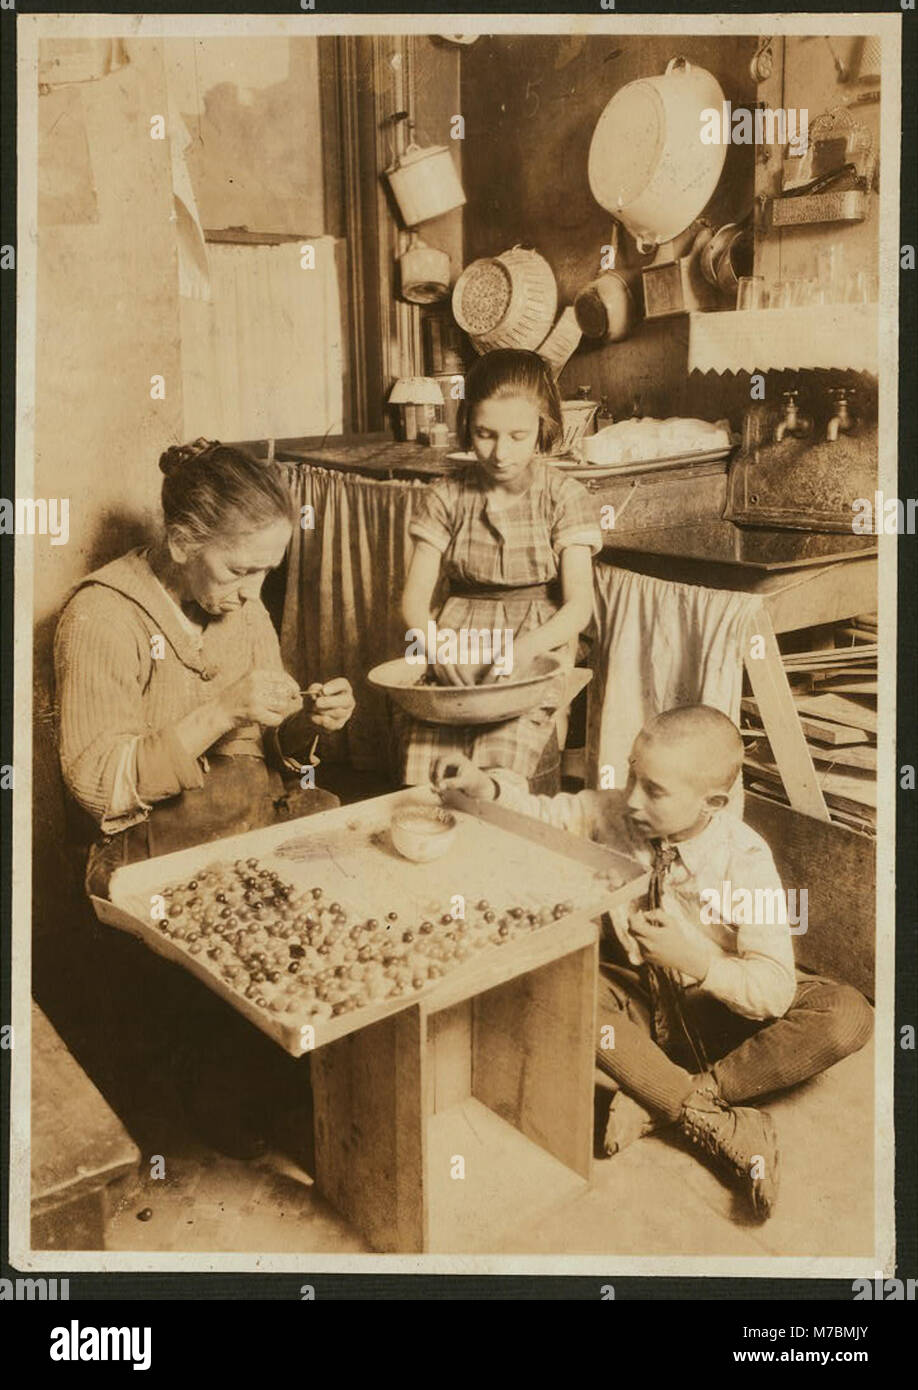 Coccaro, Angelina, 226 Thompson St., N.Y.C. Making Glass Flower Bulbs, earn about 75 cents to a $1.50 a day. Elizabeth age 10 yrs., and Frank age 8 yrs., very small and anemic. Taken by LOC nclc.04319 Stock Photo